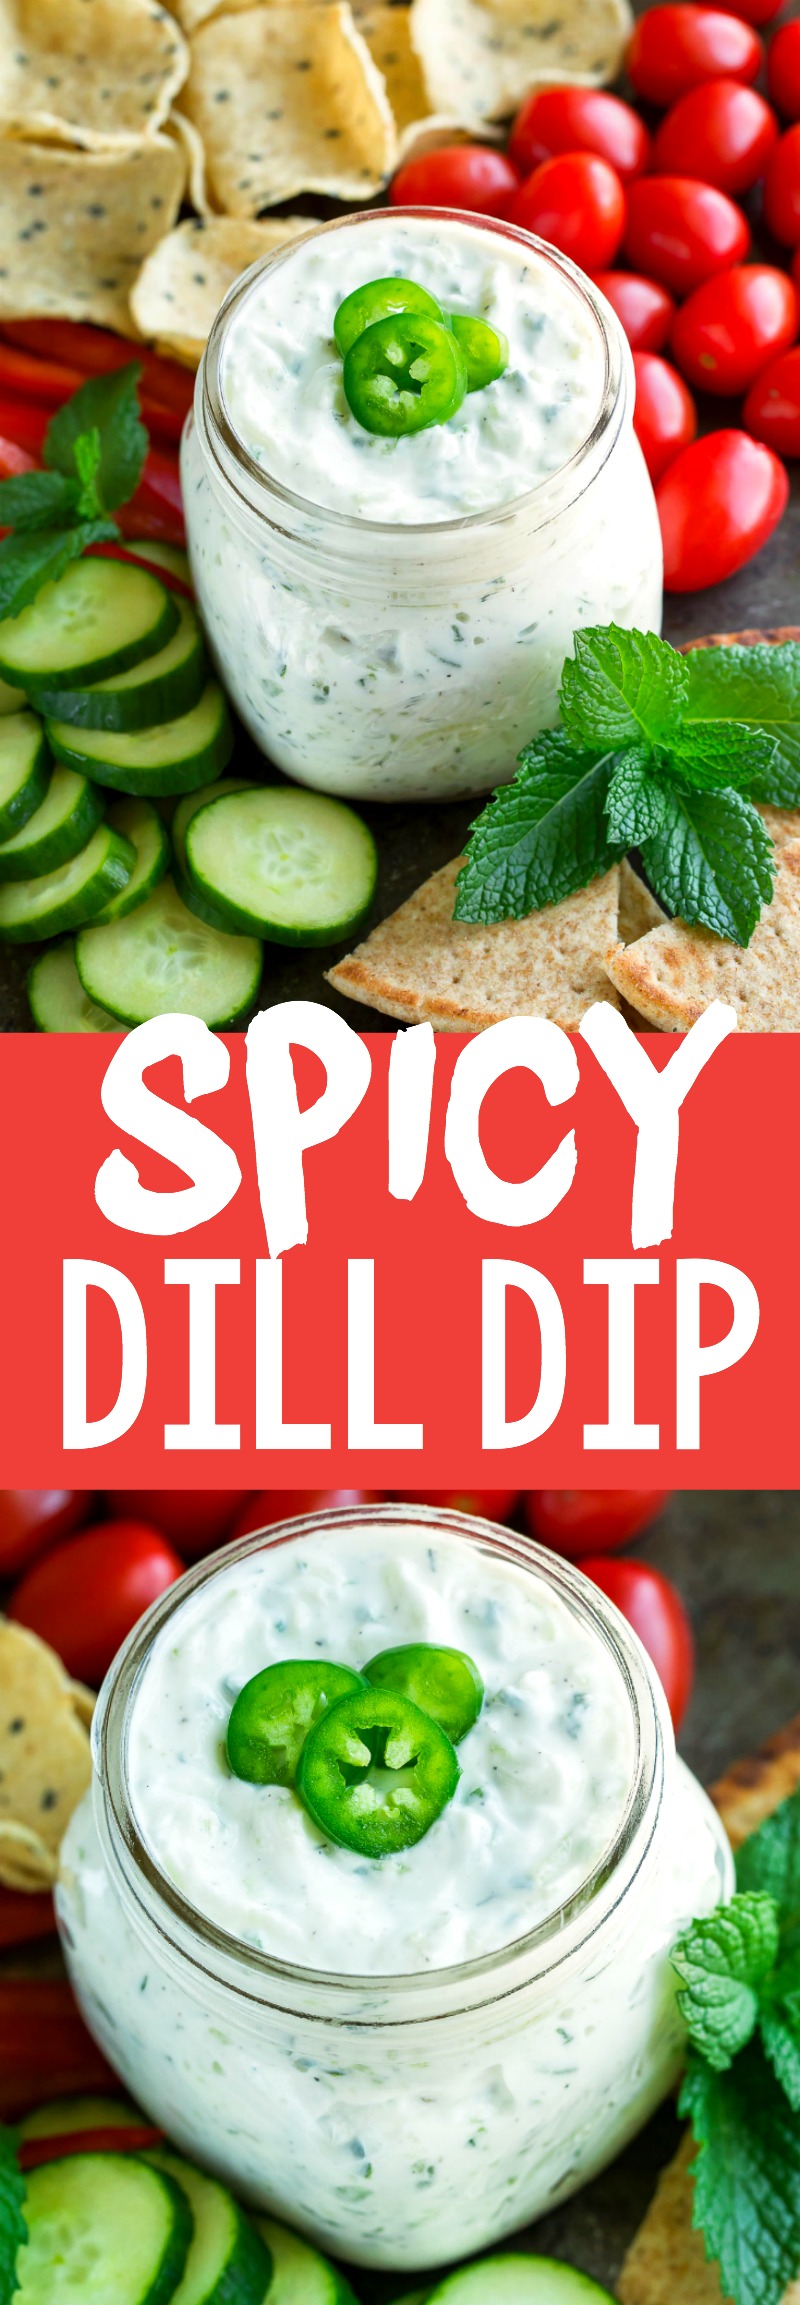 This Spicy Dill Dip makes a fantastic snack or appetizer. Serve it with pita and veggie dippers as an easy make-ahead after school snack or bring it to your next party or potluck! #appetizer #dip #dill #glutenfree #spicy #jalapeno #party #partyfood #snack